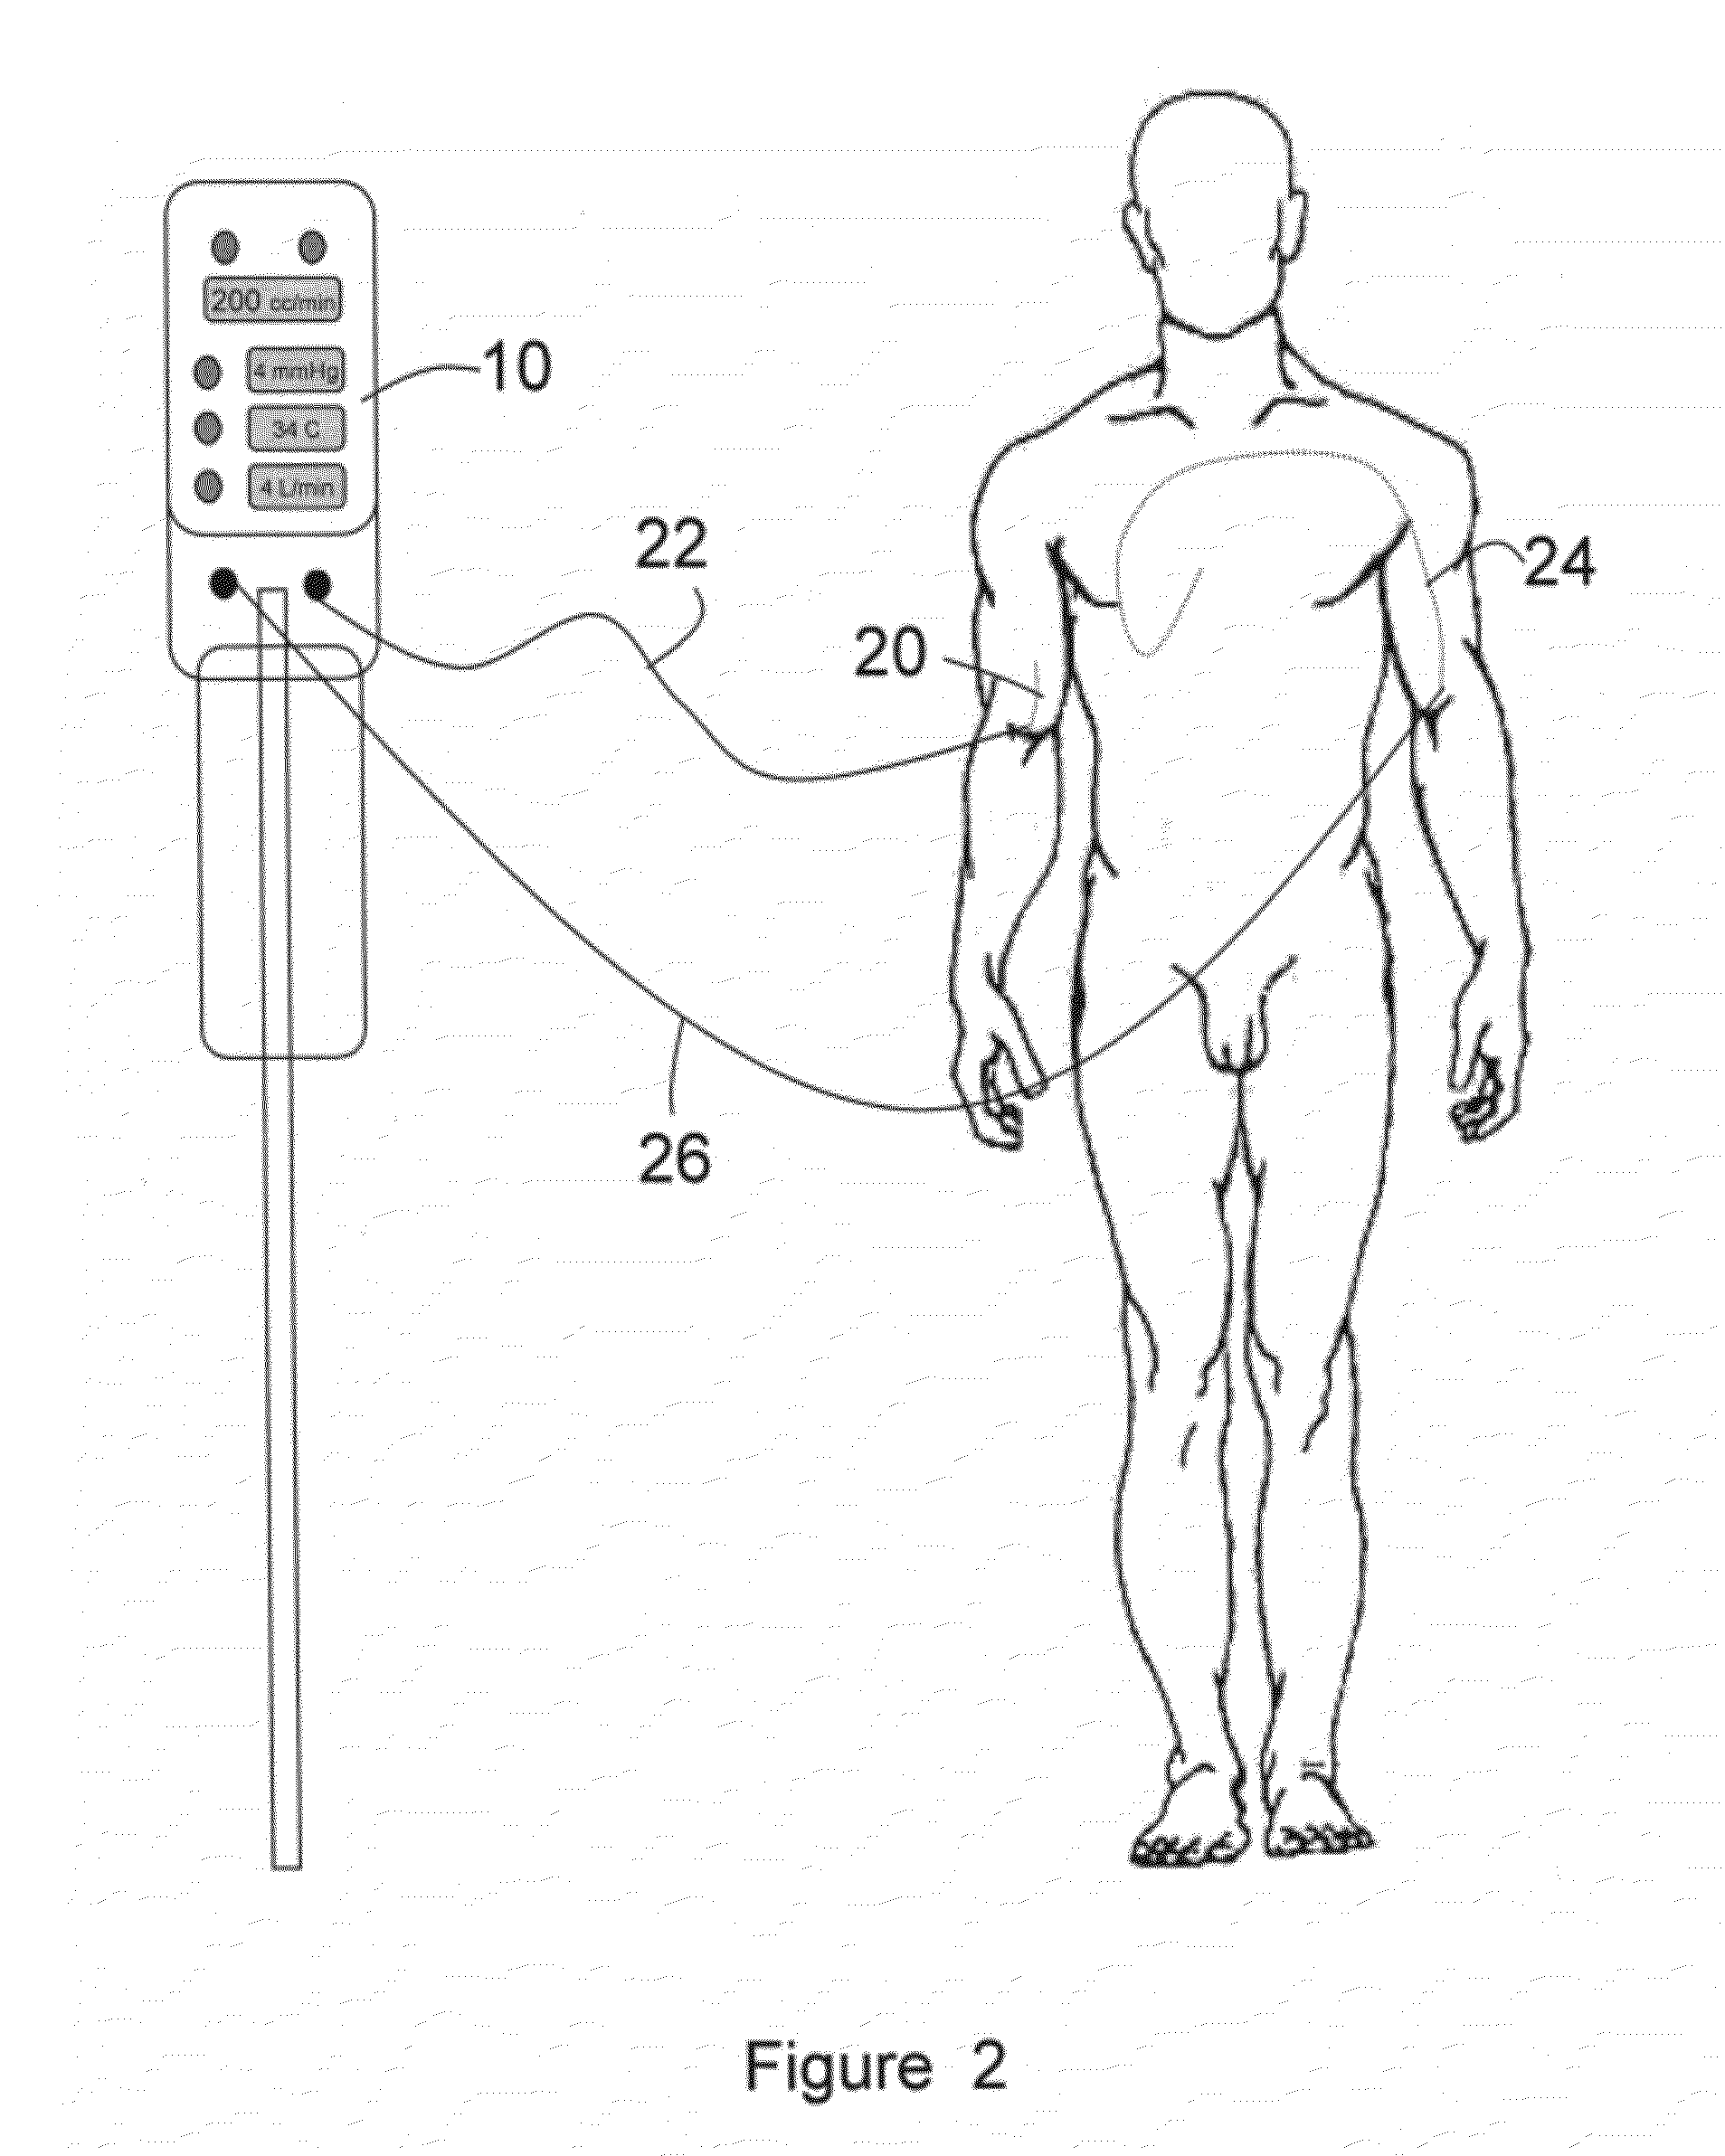 Automated Therapy System and Method